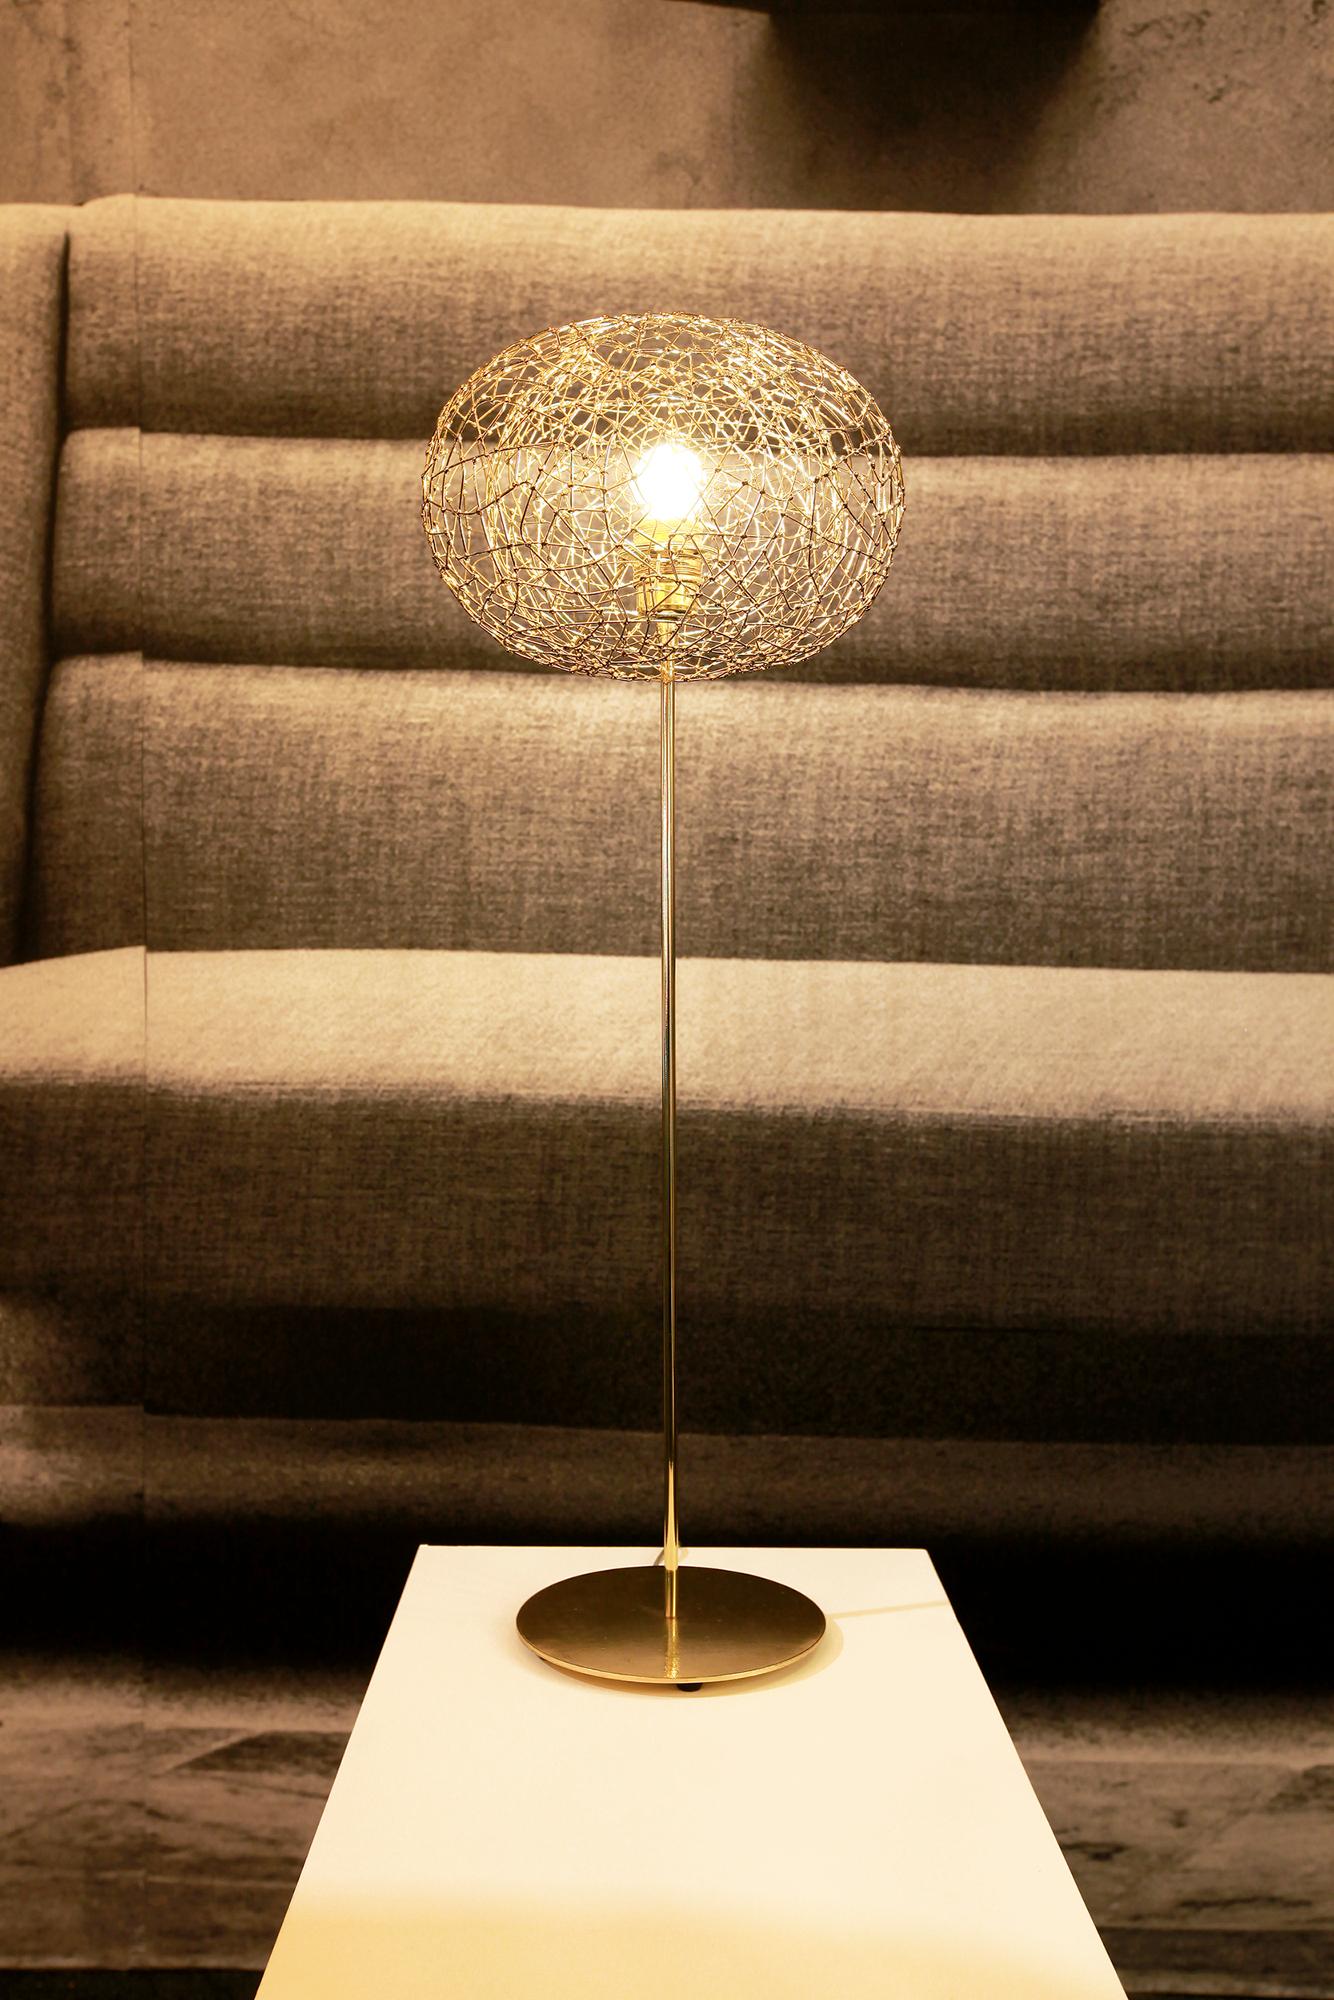 Plated Halo brass table lamps by Ango, a modern sculptural jewel like lighting For Sale